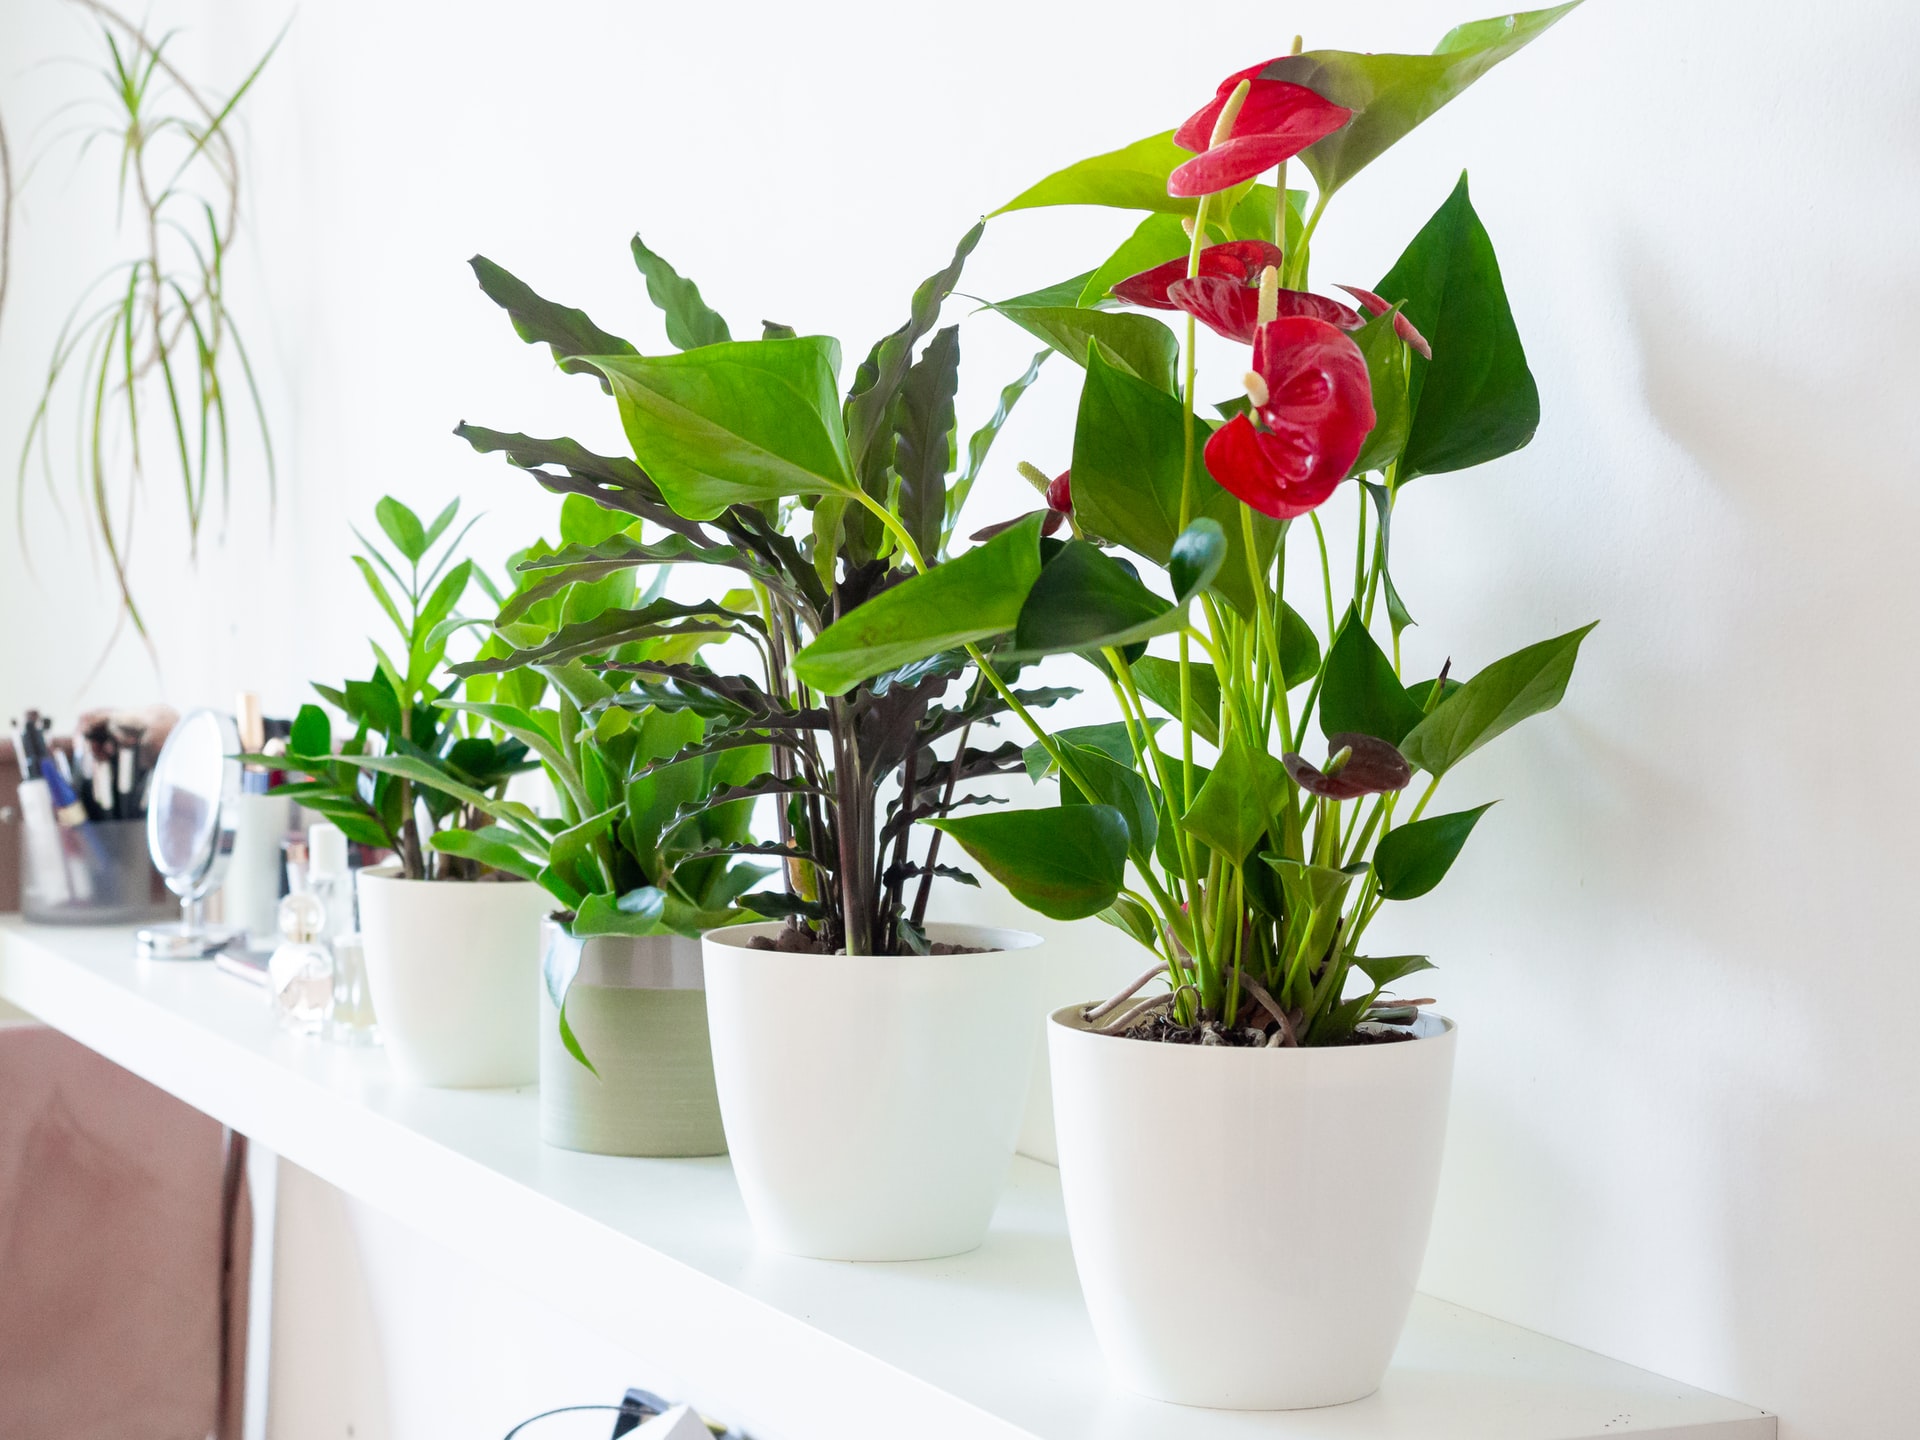 6 super low maintenance plants that thrive indoors